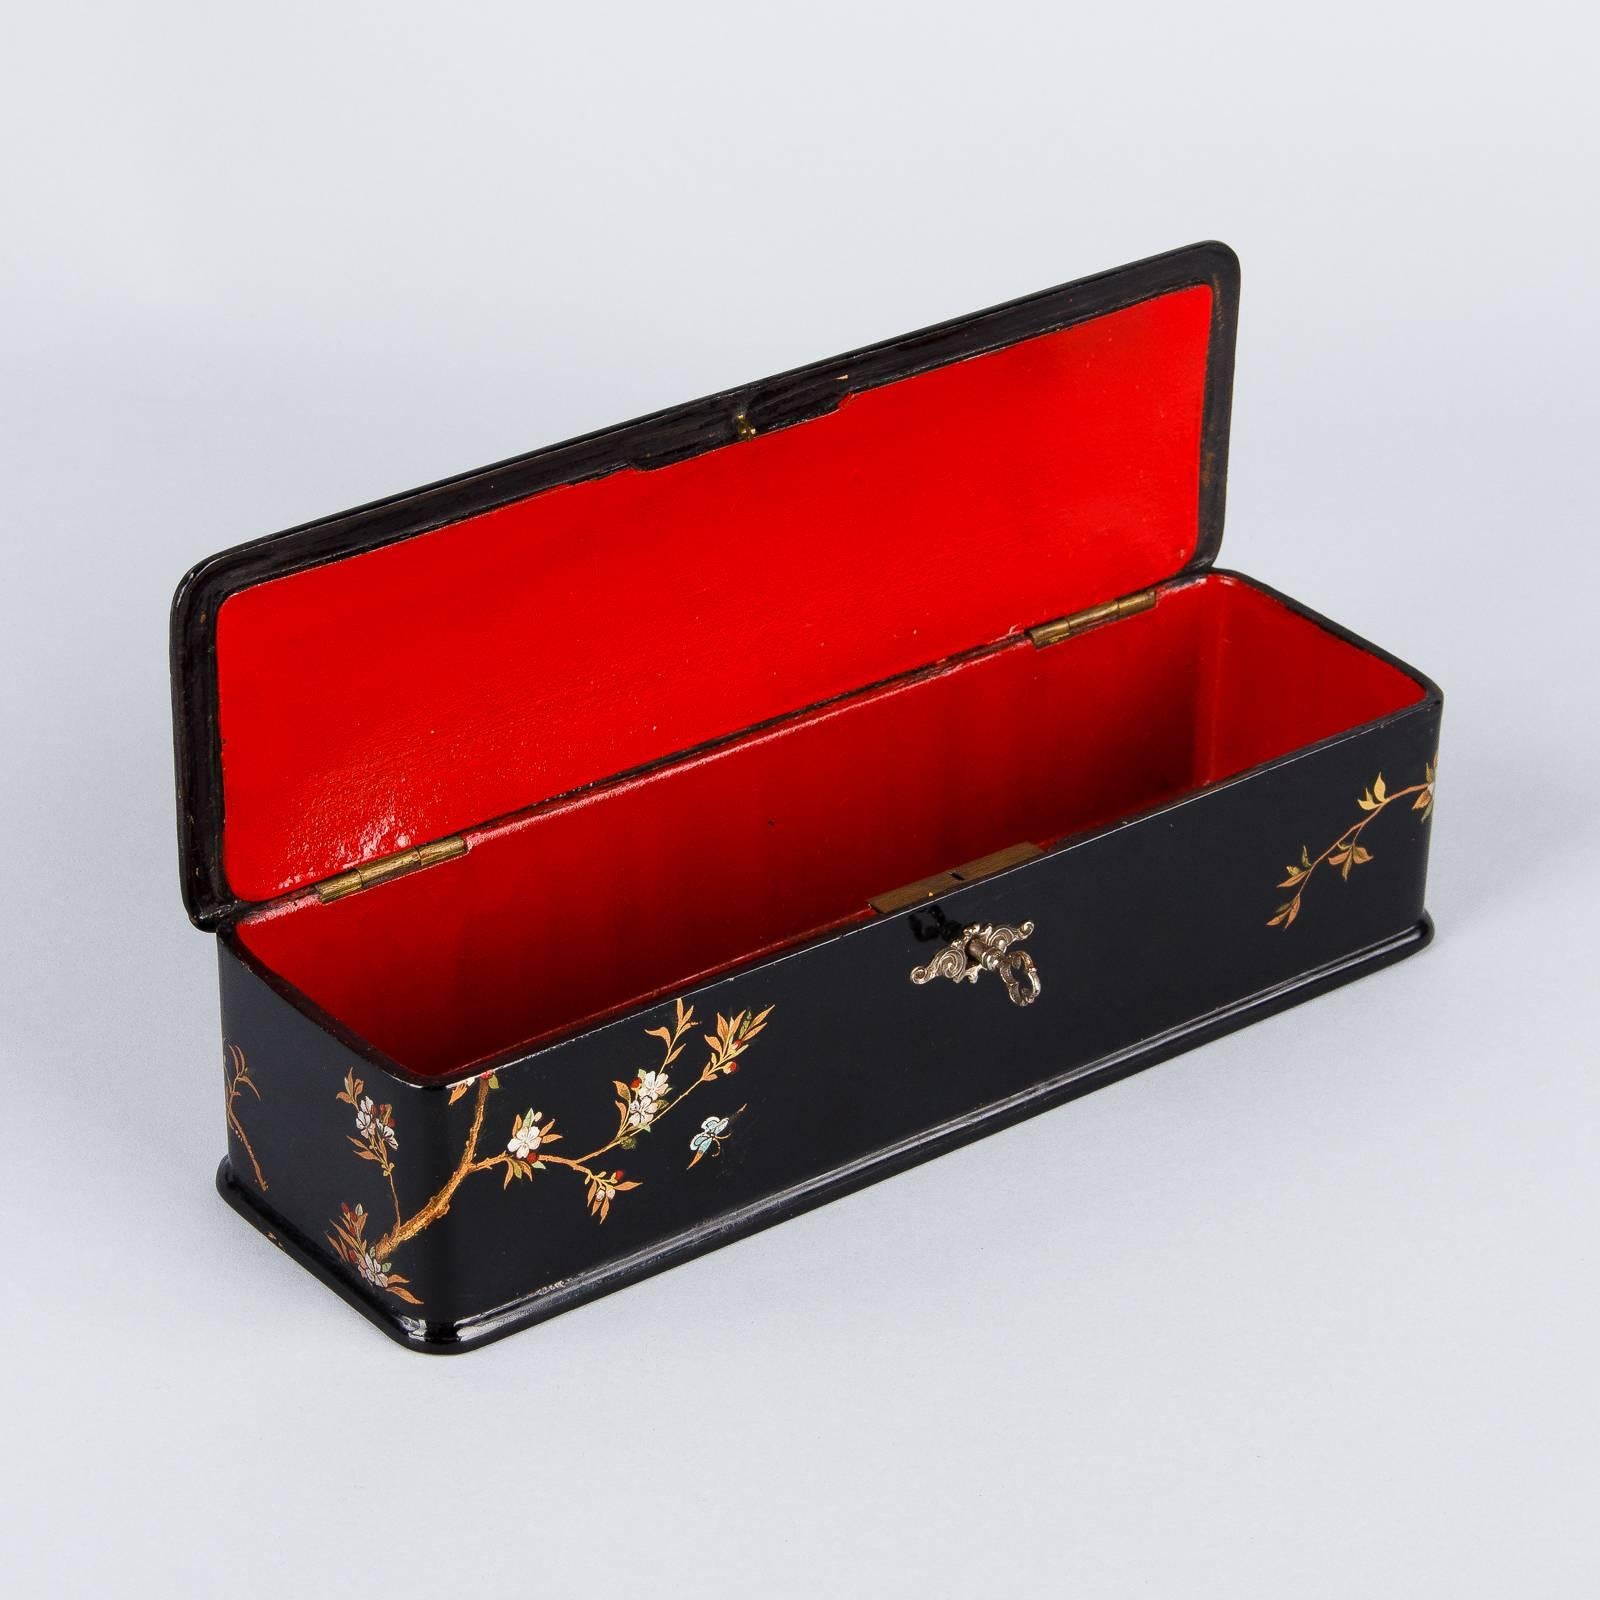 A Napoleon III period box made of lacquered blackwood with chinoiserie motifs. The inside is wood painted red. The box has its own key.